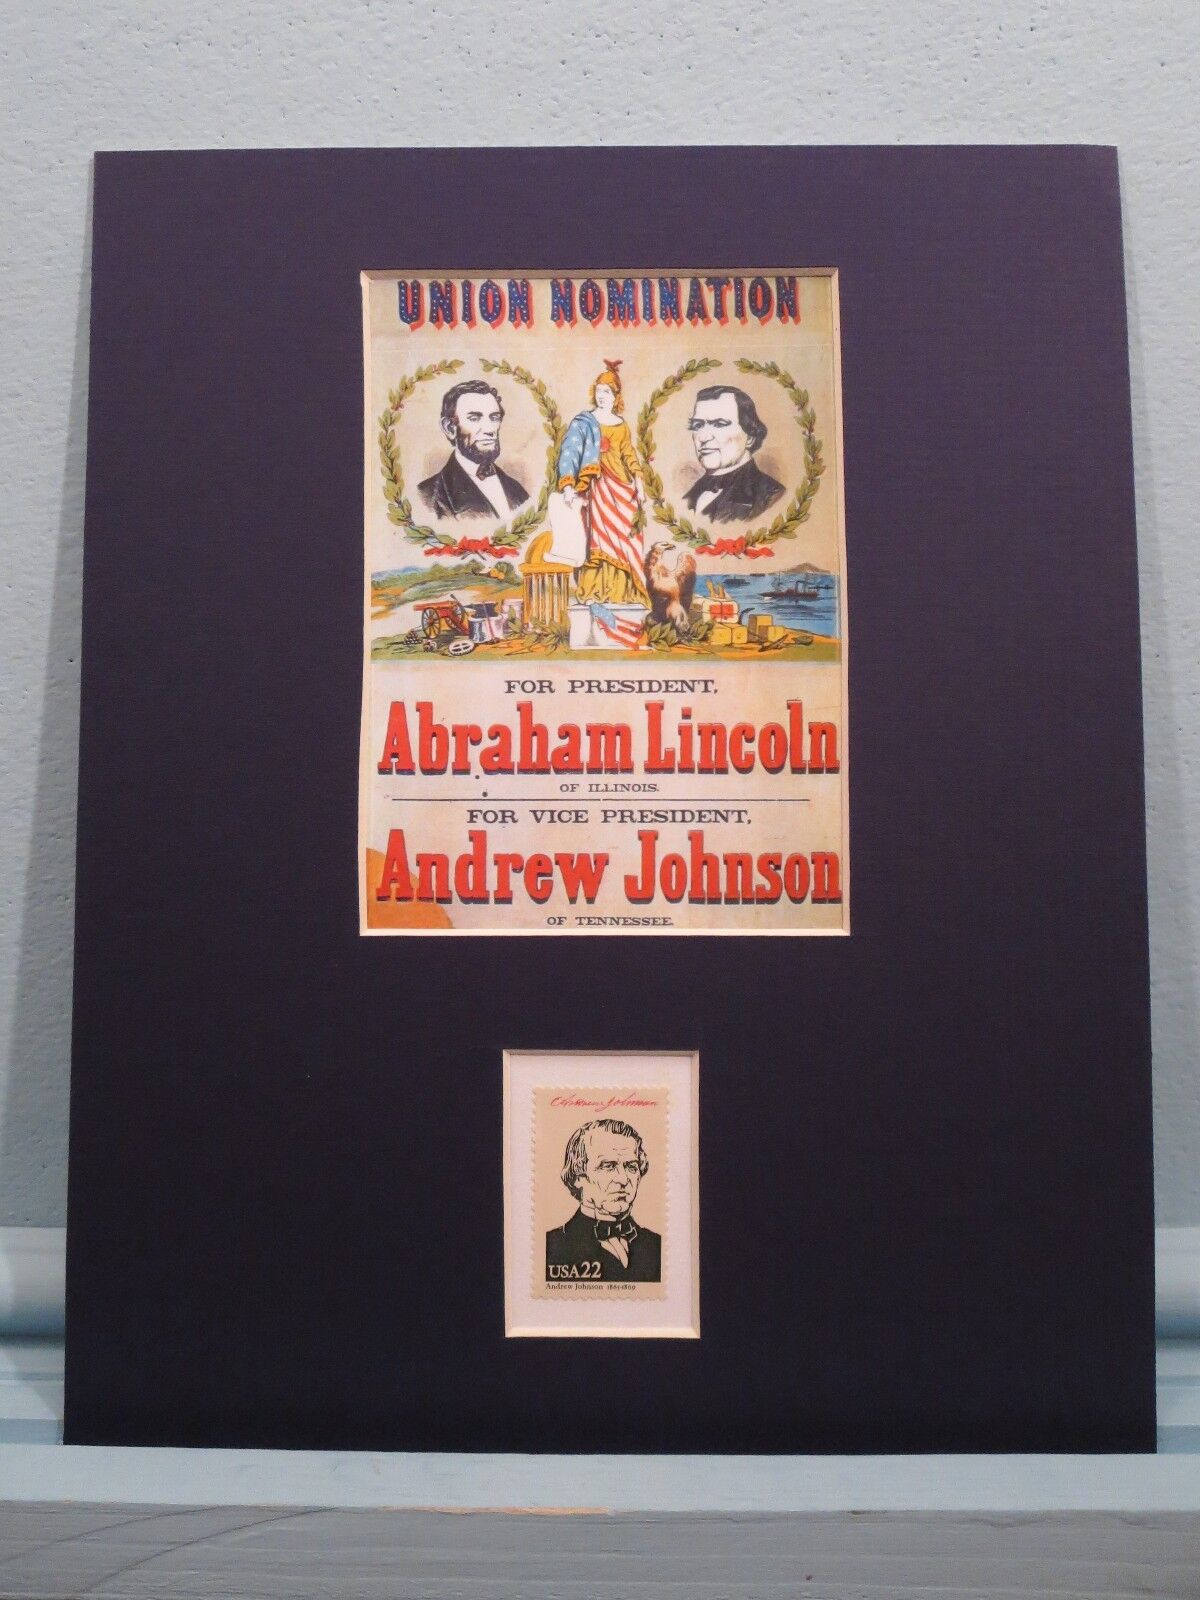 1864 - Andrew Johnson Runs for Vice- President with Abraham Lincoln & his stamp